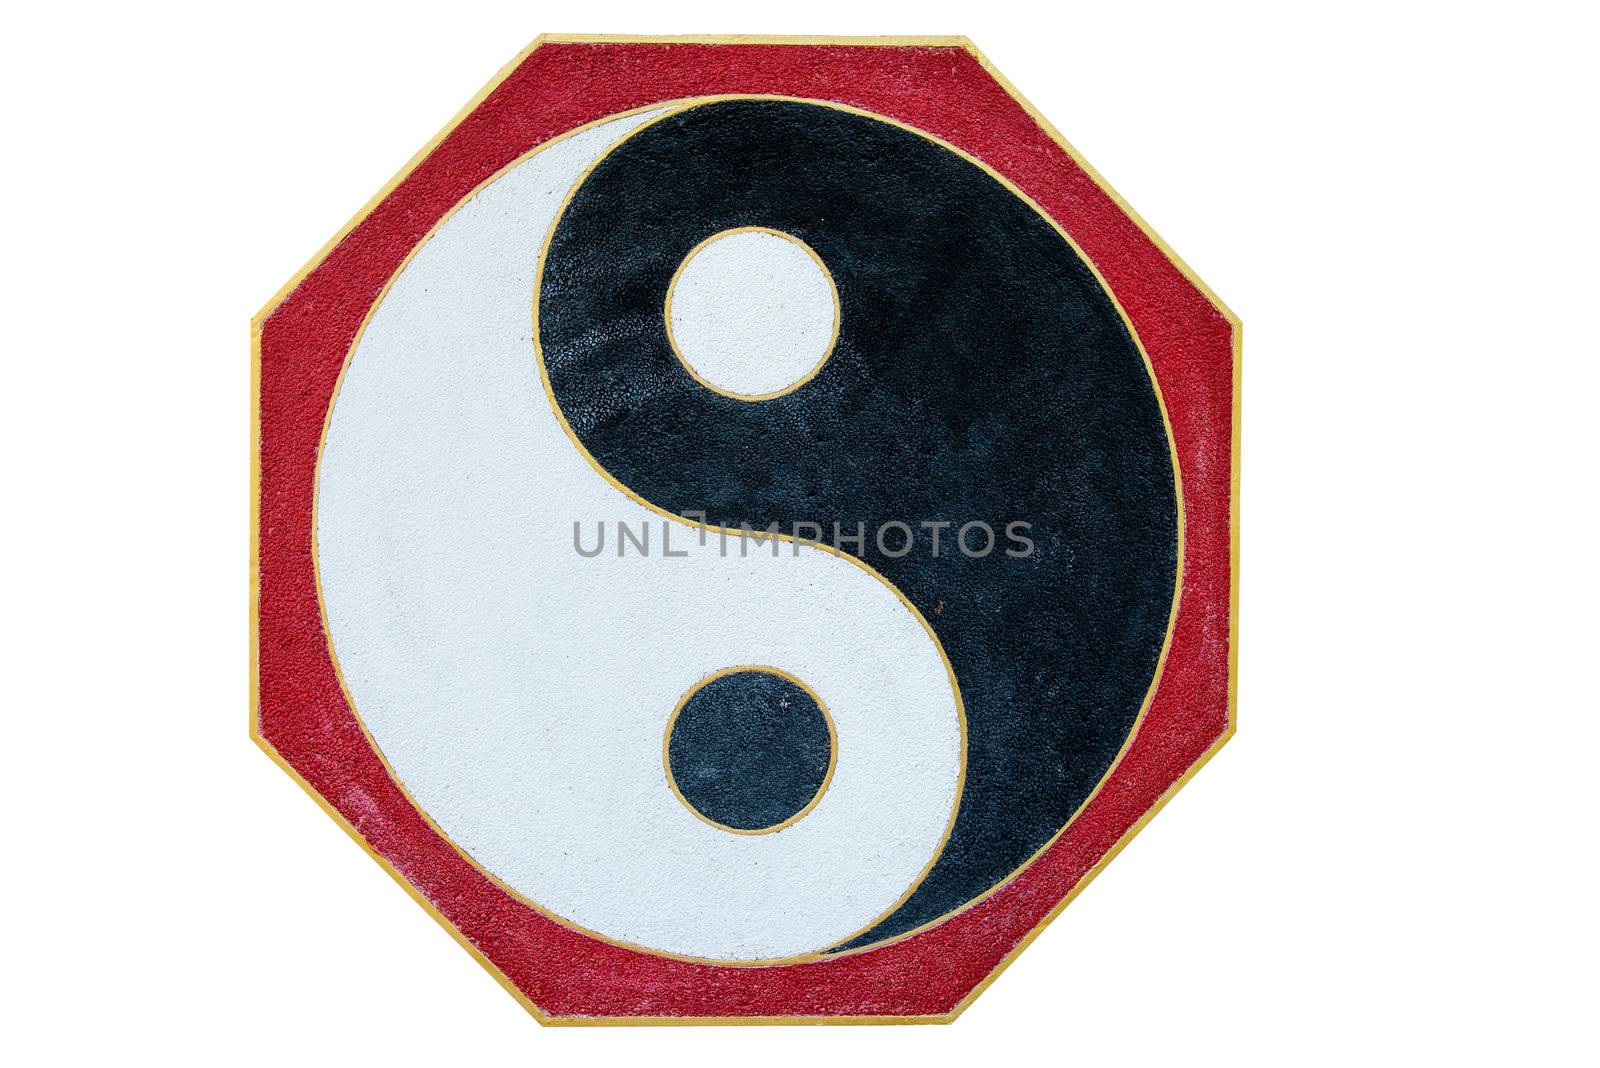 Chinese Yin Yang sign and symbol, isolated in white